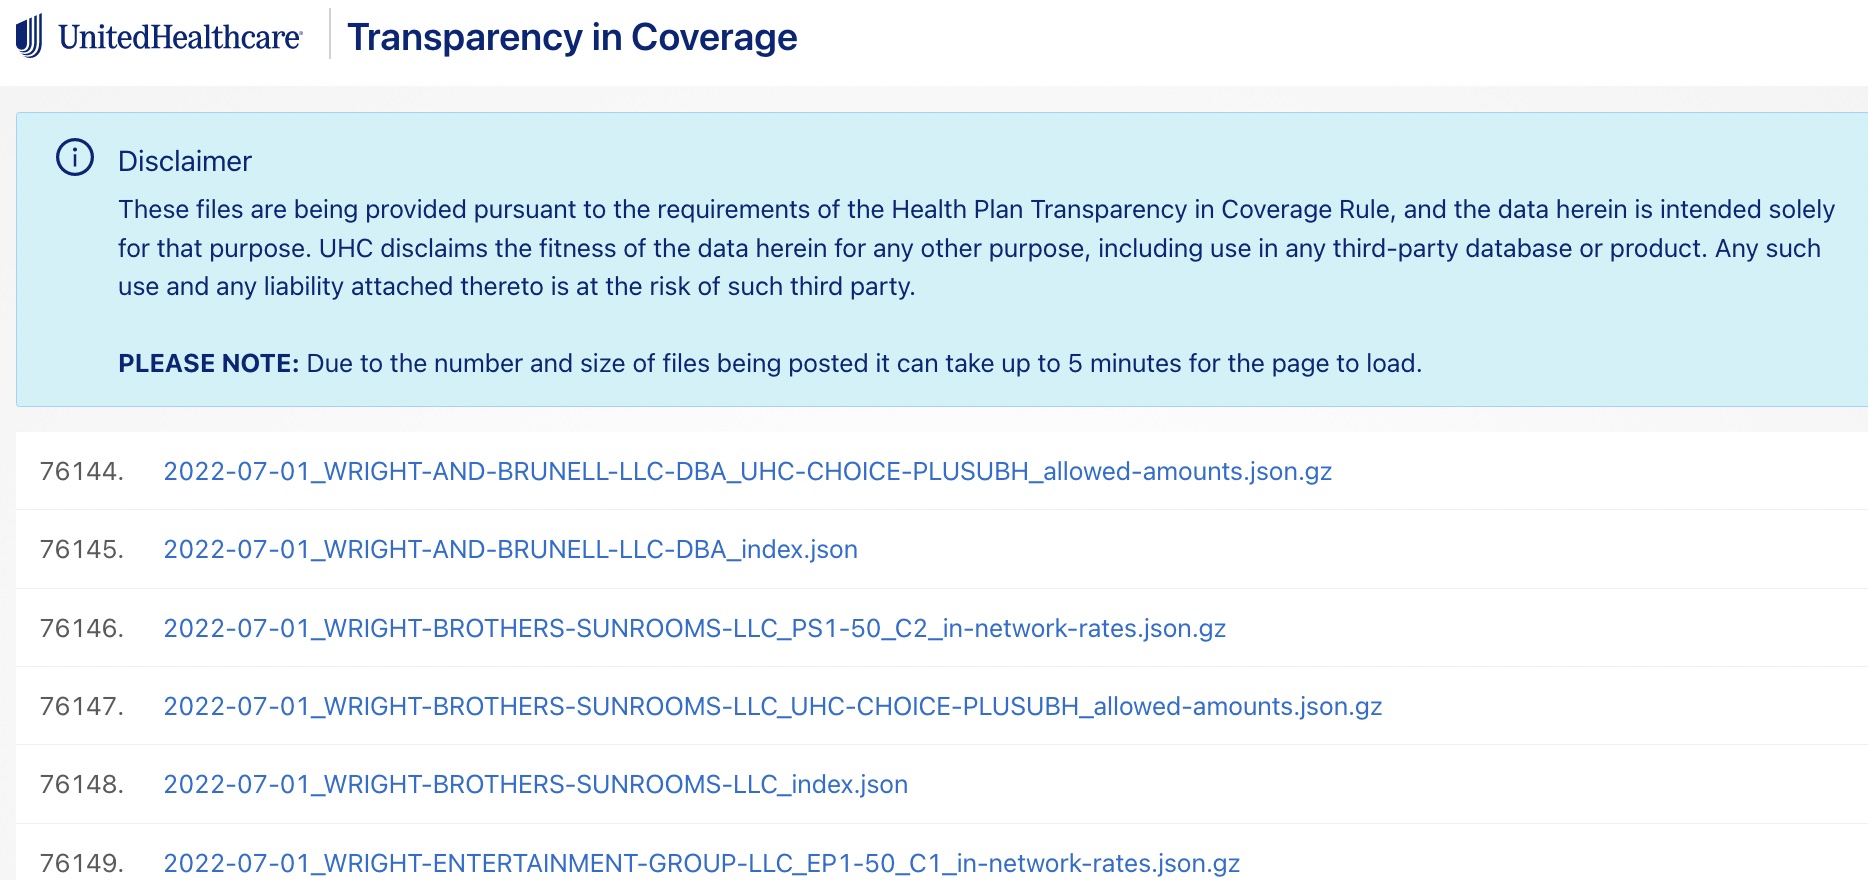 Insurer price transparency rule goes into effect